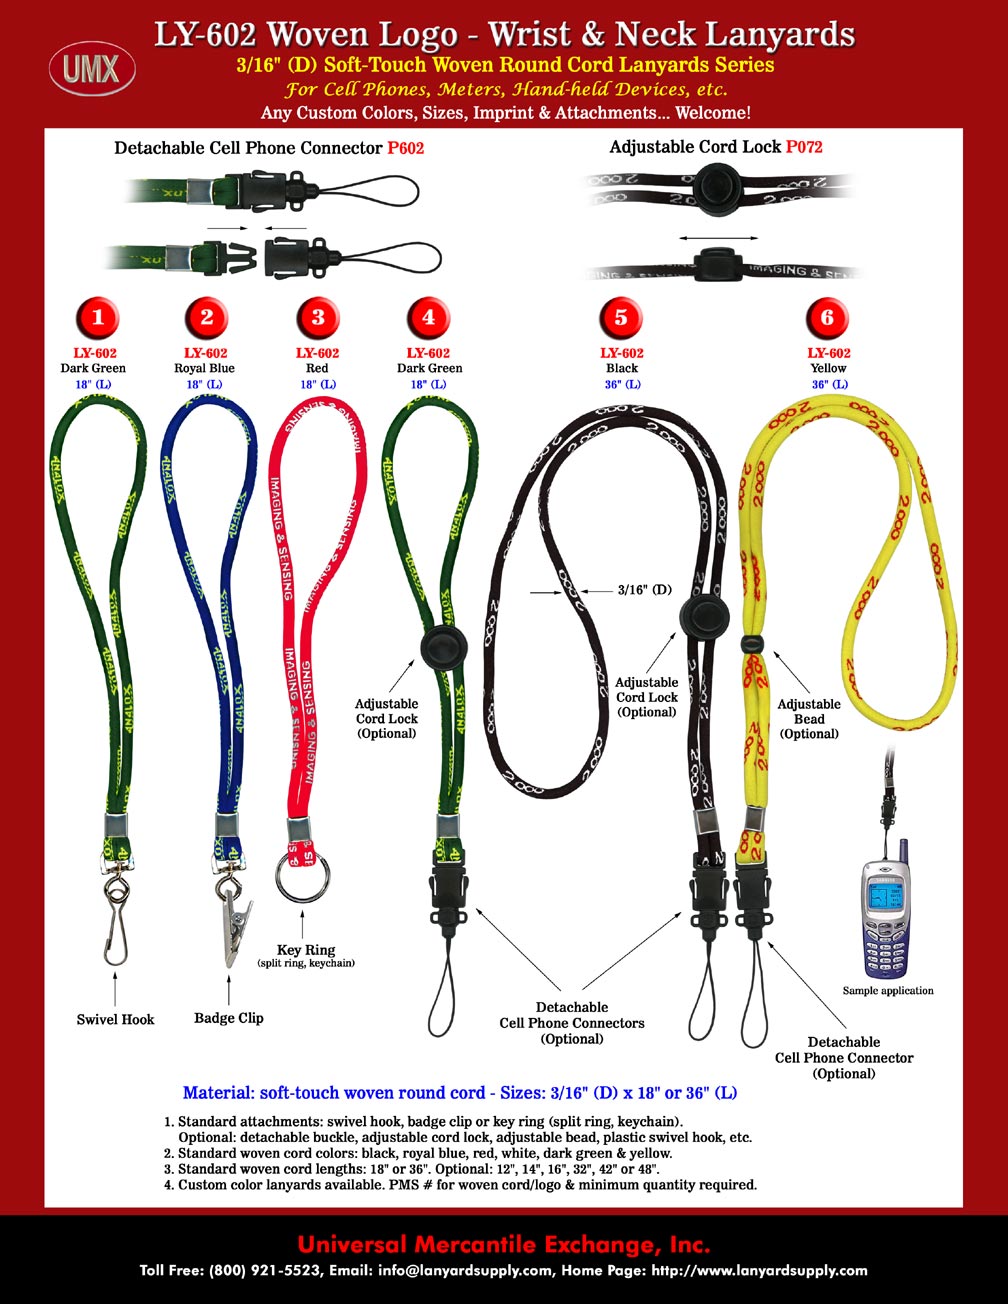 Round Cord Woven Lanyards, Cell Phone wrist lanyards and Custom Woven Neck Lanyards with Weaved-In Logos.